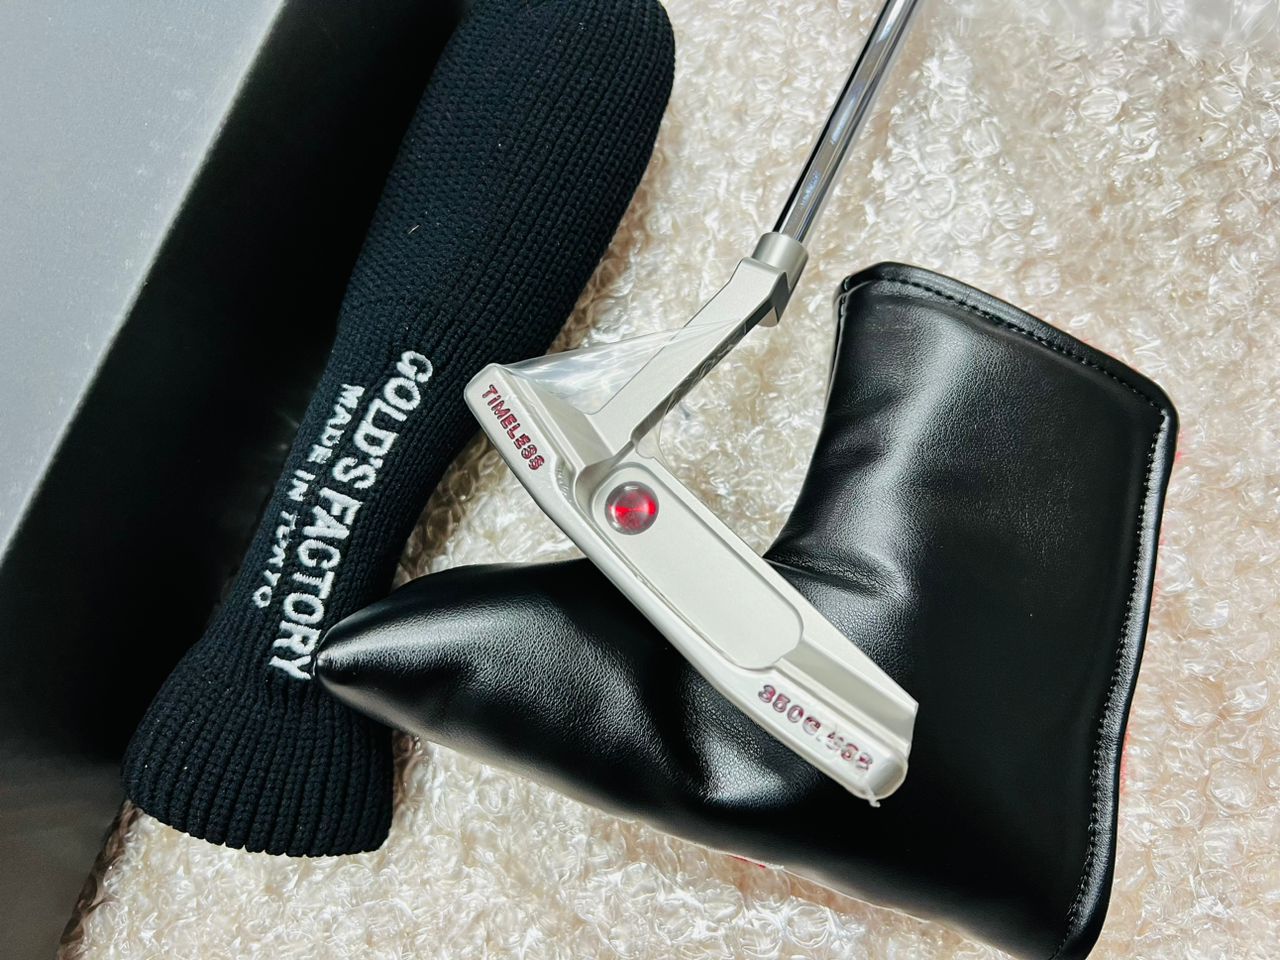 GOLD'S FACTORY 4262 - NEWPORT 2 (TIMELESS NECK) GSS 350 STYLE PUTTER